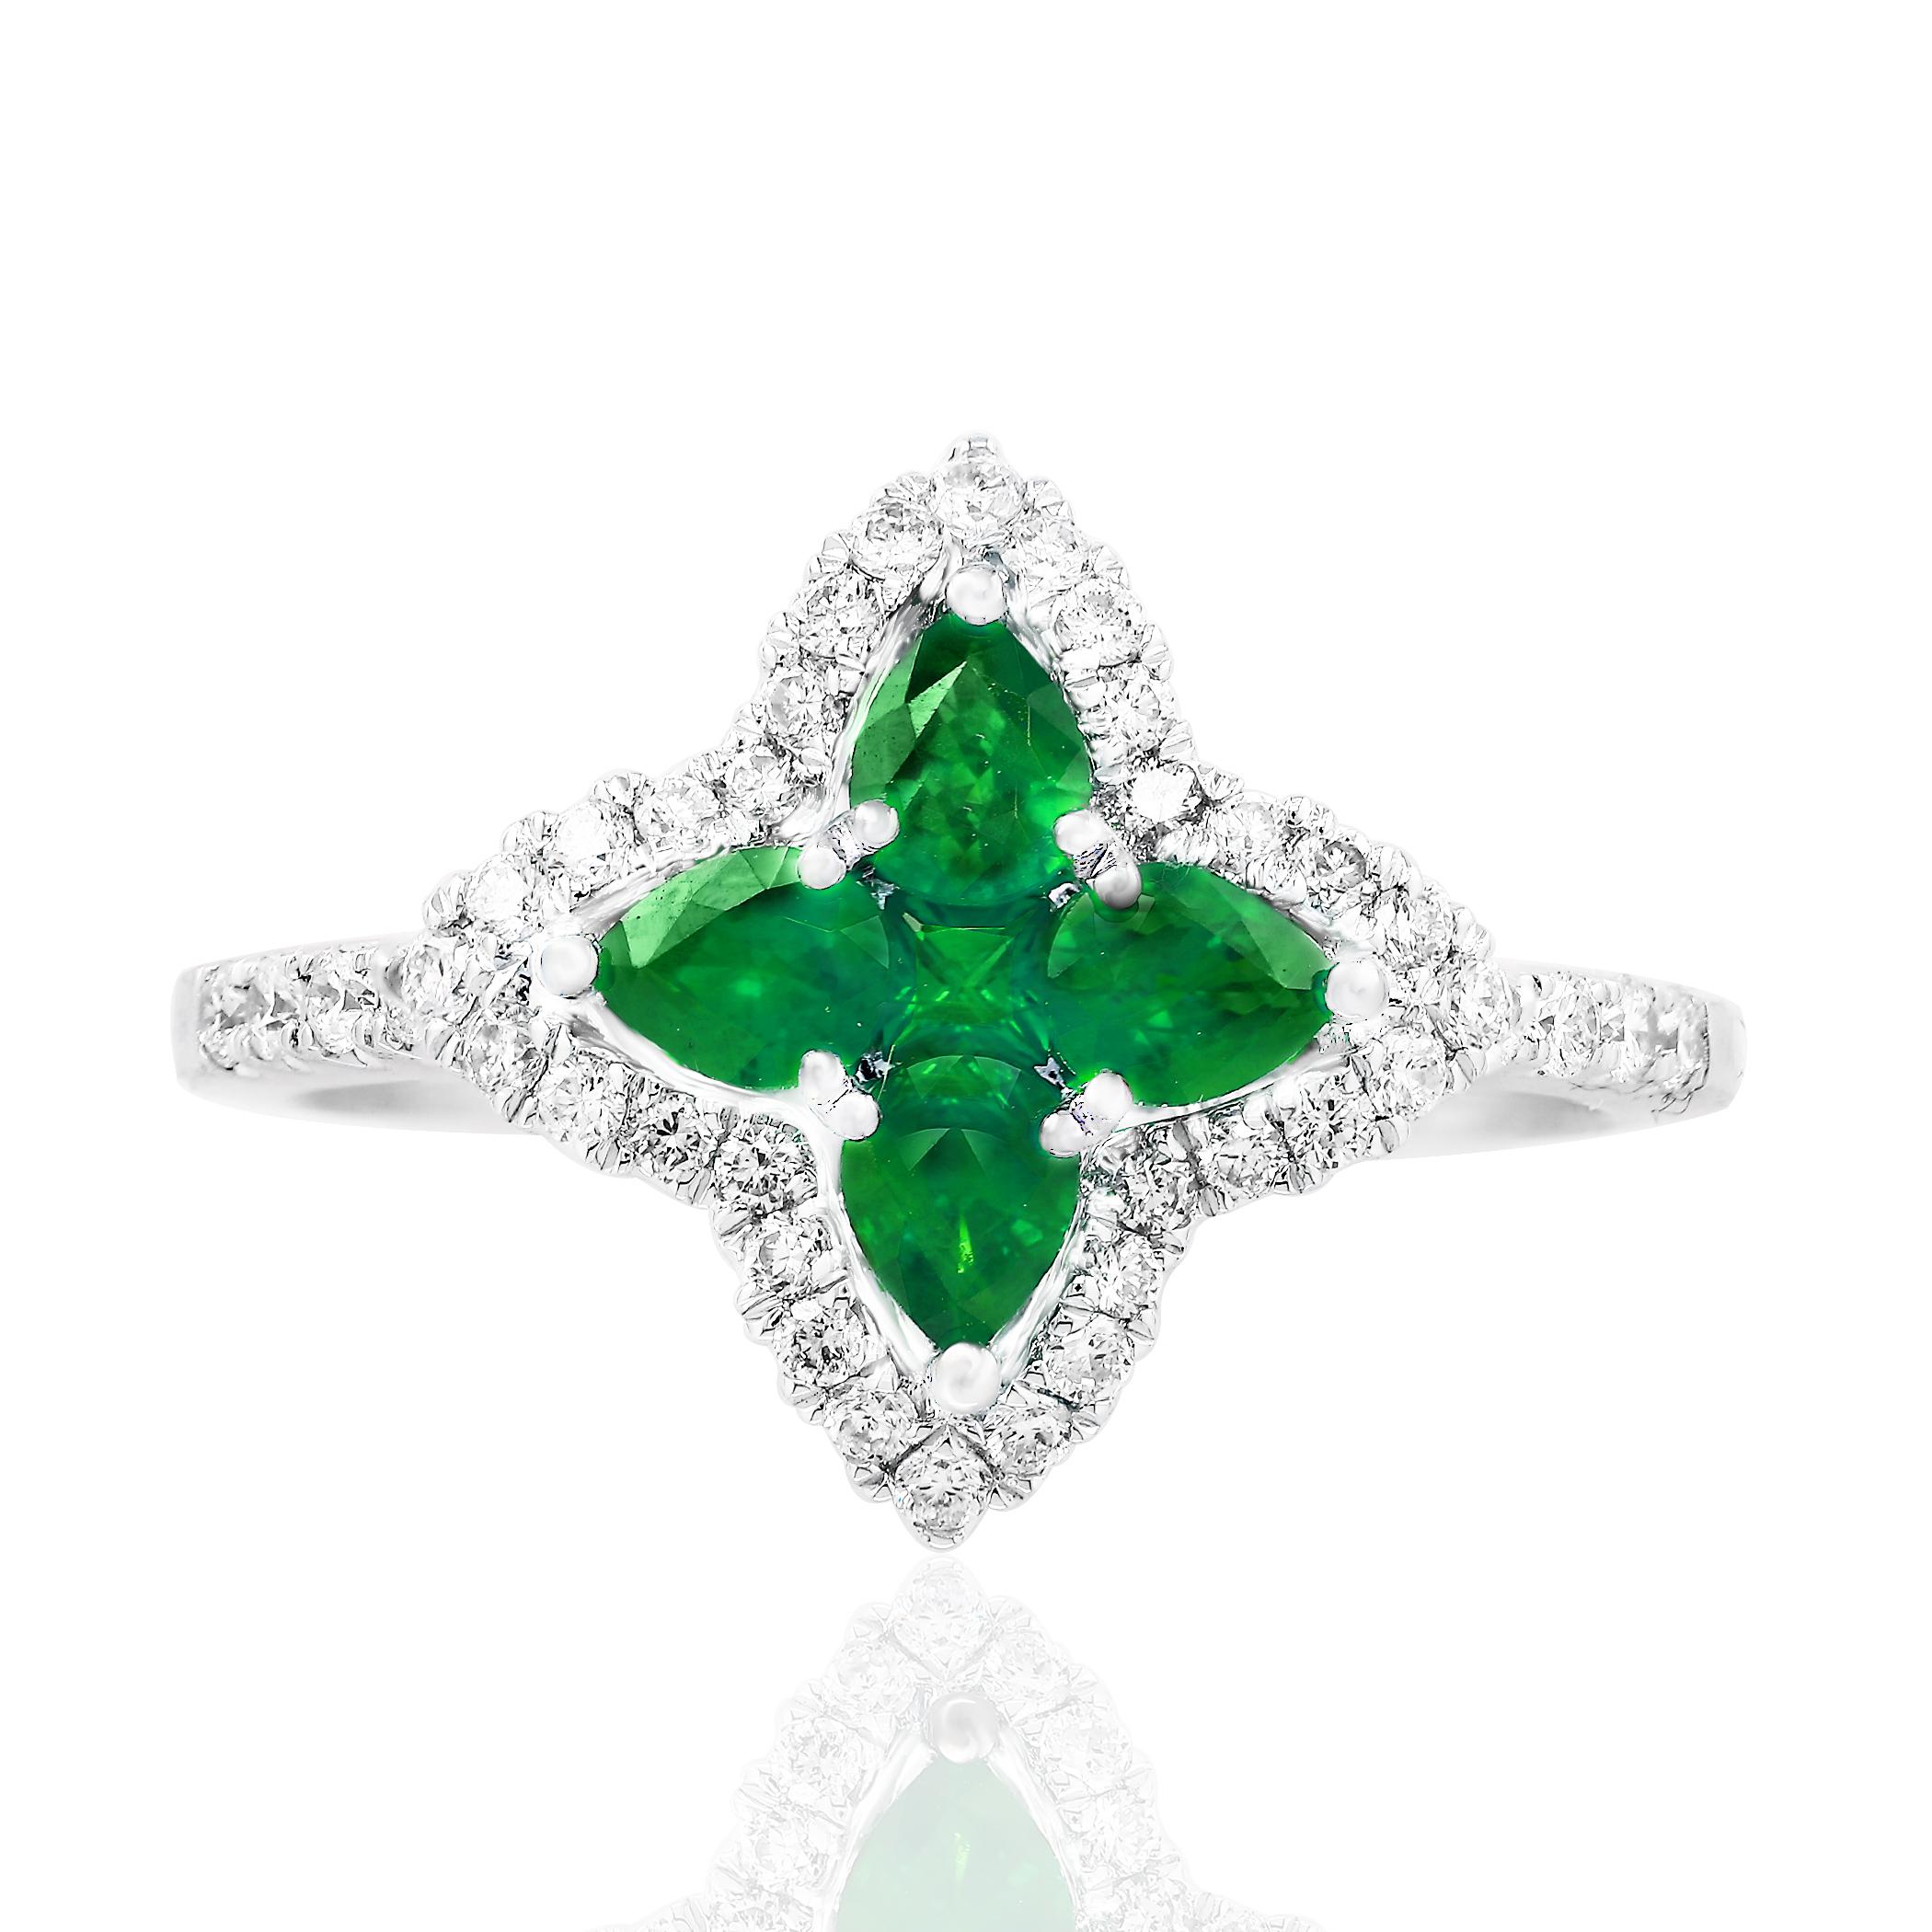 Showcasing flower design color-rich ring with 4 pear shape emerald weighing 0.56 carats total and 1 round shape emerald weighing 0.05 carat, accented by a row of round brilliant diamonds. Diamonds weigh 0.35 carats total. Set in a polished 18K white